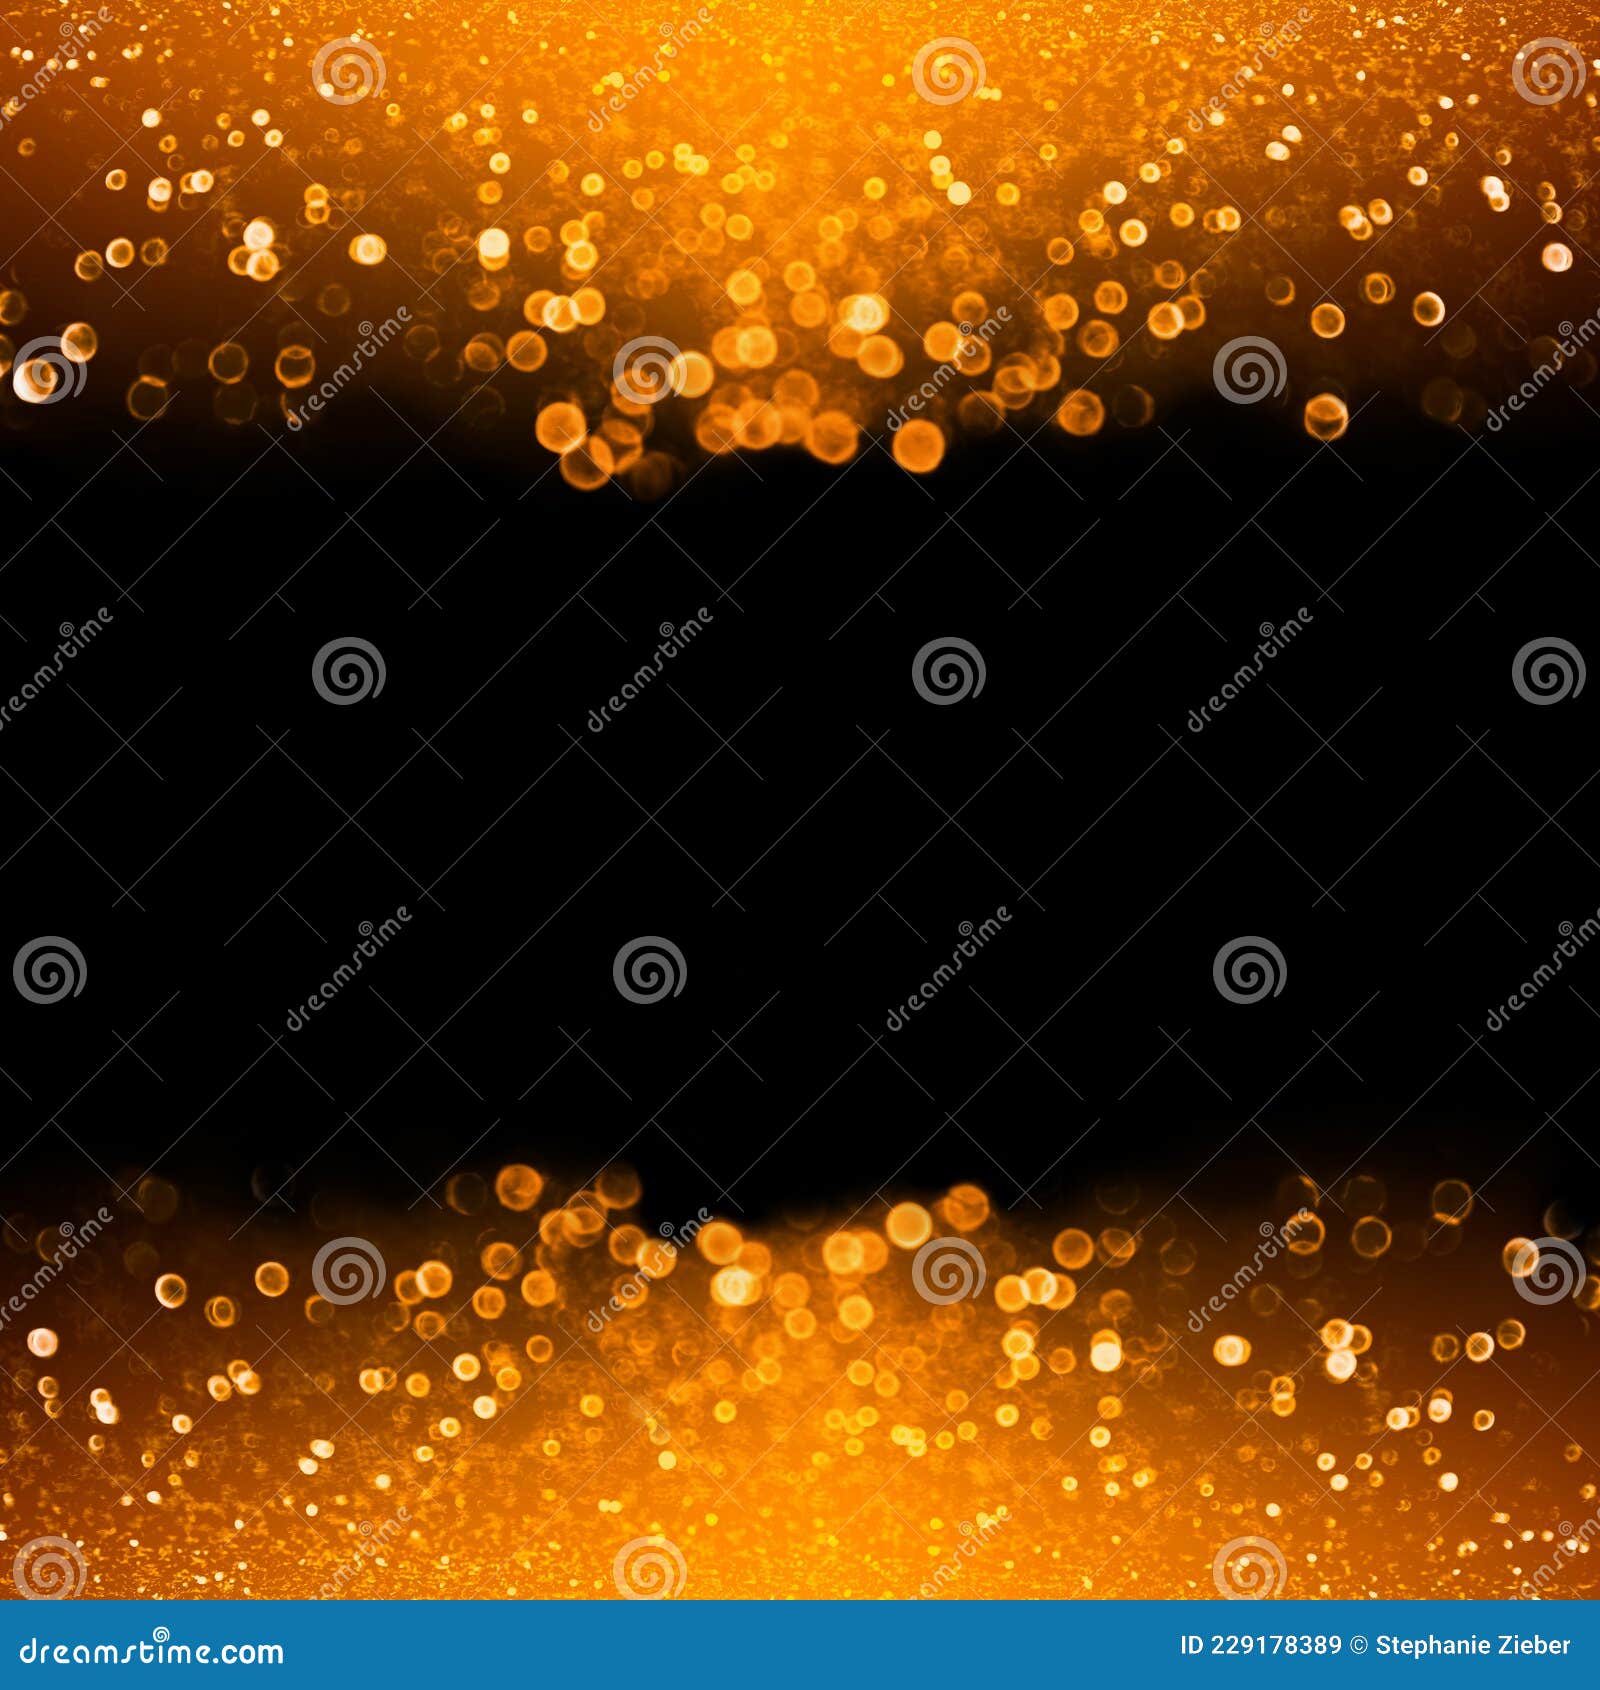 Orange Glitter Thanksgiving Fall Gala or Halloween Sparkle Party Background  Stock Image - Image of autumn, glittery: 229178389